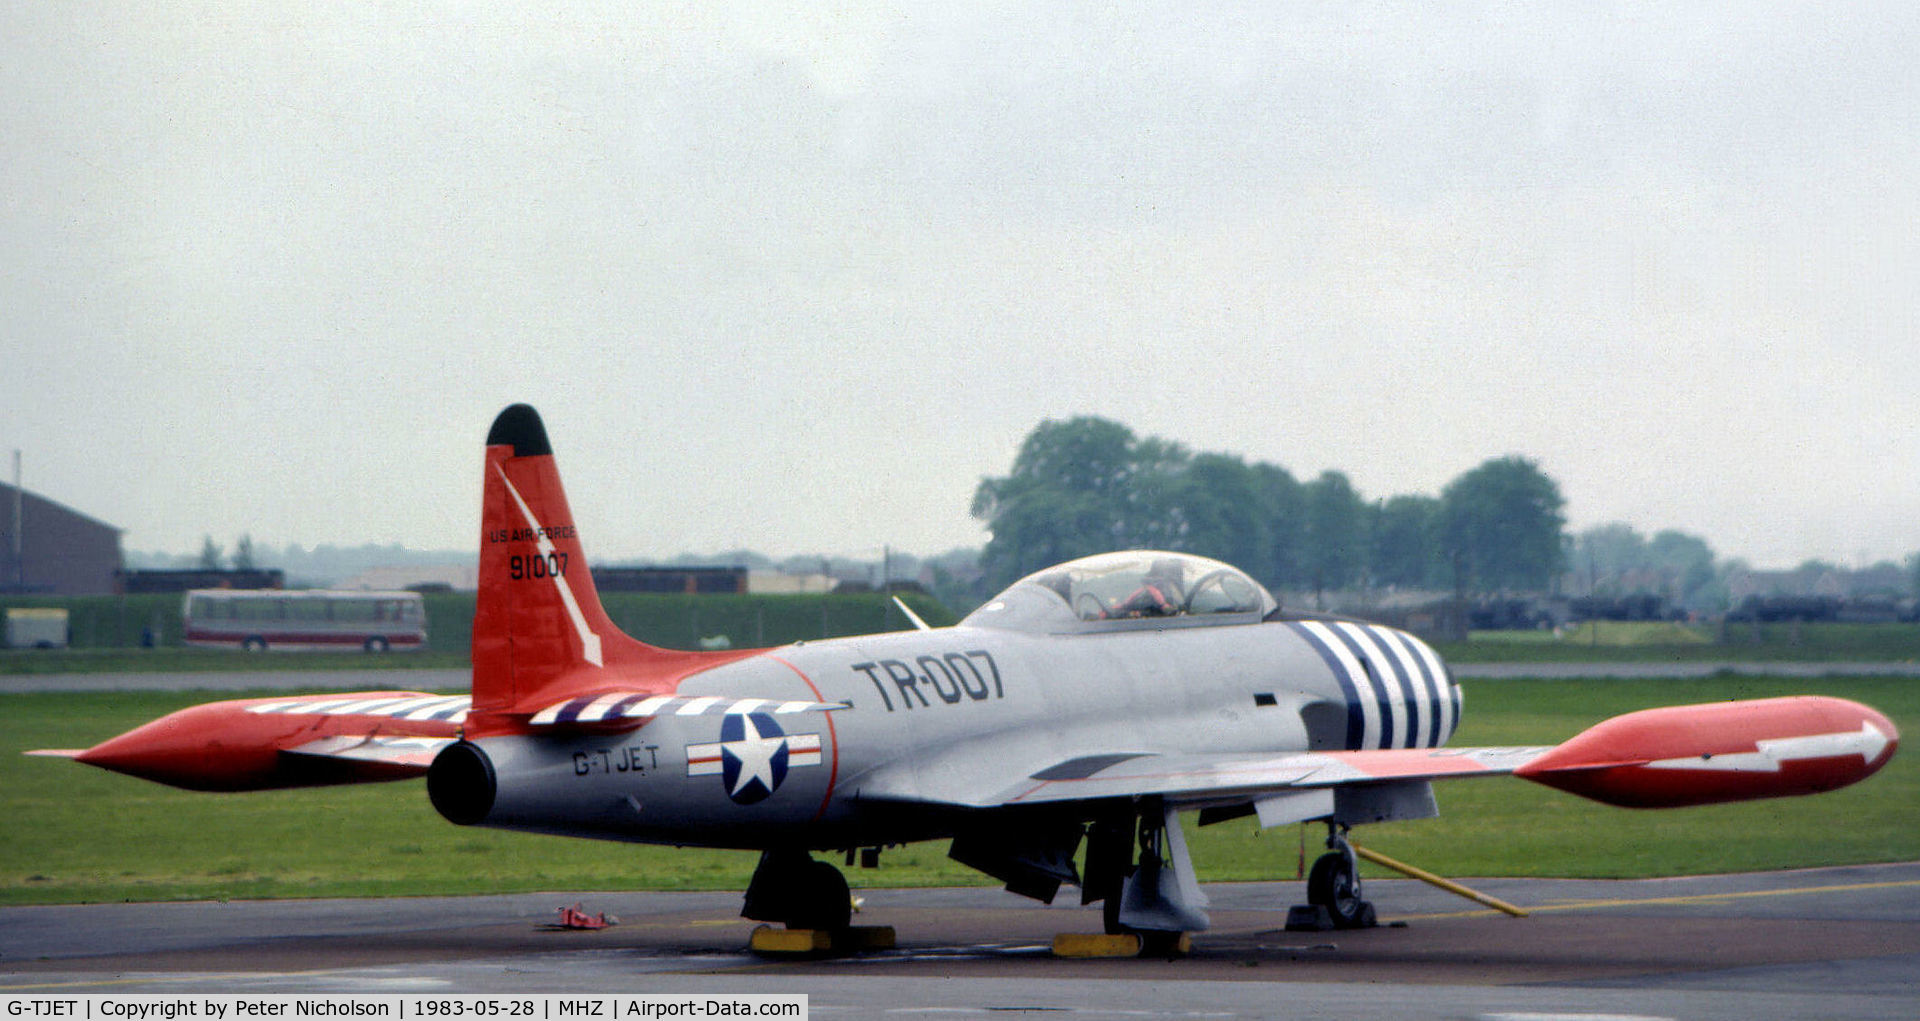 G-TJET, 1952 Lockheed T-33A Shooting Star C/N 580-6350, This T-33A Shooting Star was in action at the 1983 RAF Mildenhall Air Fete.